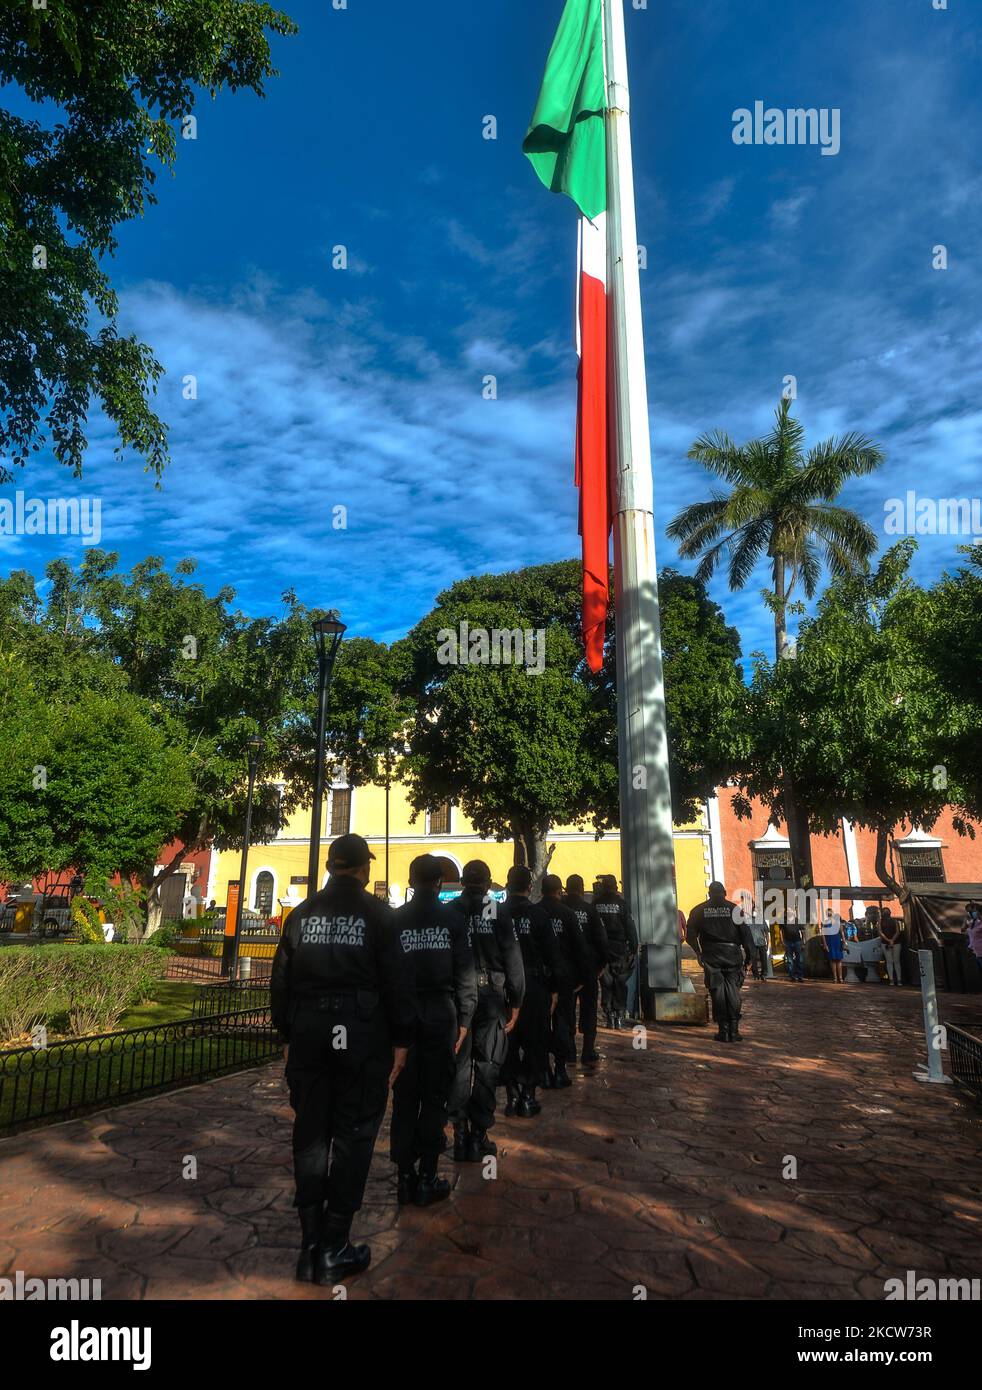 Members of the municipal police (Policía Municipal de Valladolid) in front of the large national flag of Mexico during the short ceremony of El Día de la Revolucion (Revolution Day), a national holiday commemorating the beginning of the Mexican Revolution on November 20, 1910. Official Revolution Day celebrations have been canceled due to the Covid-19 pandemic. The city of Valladolid was the site of the 'first spark of the Mexican Revolution,' also known as the Dzelkoop Plan, an uprising that began on June 4, 1910, by Maximiliano R. Bonilla and other leaders of the Independent Electoral Center Stock Photo